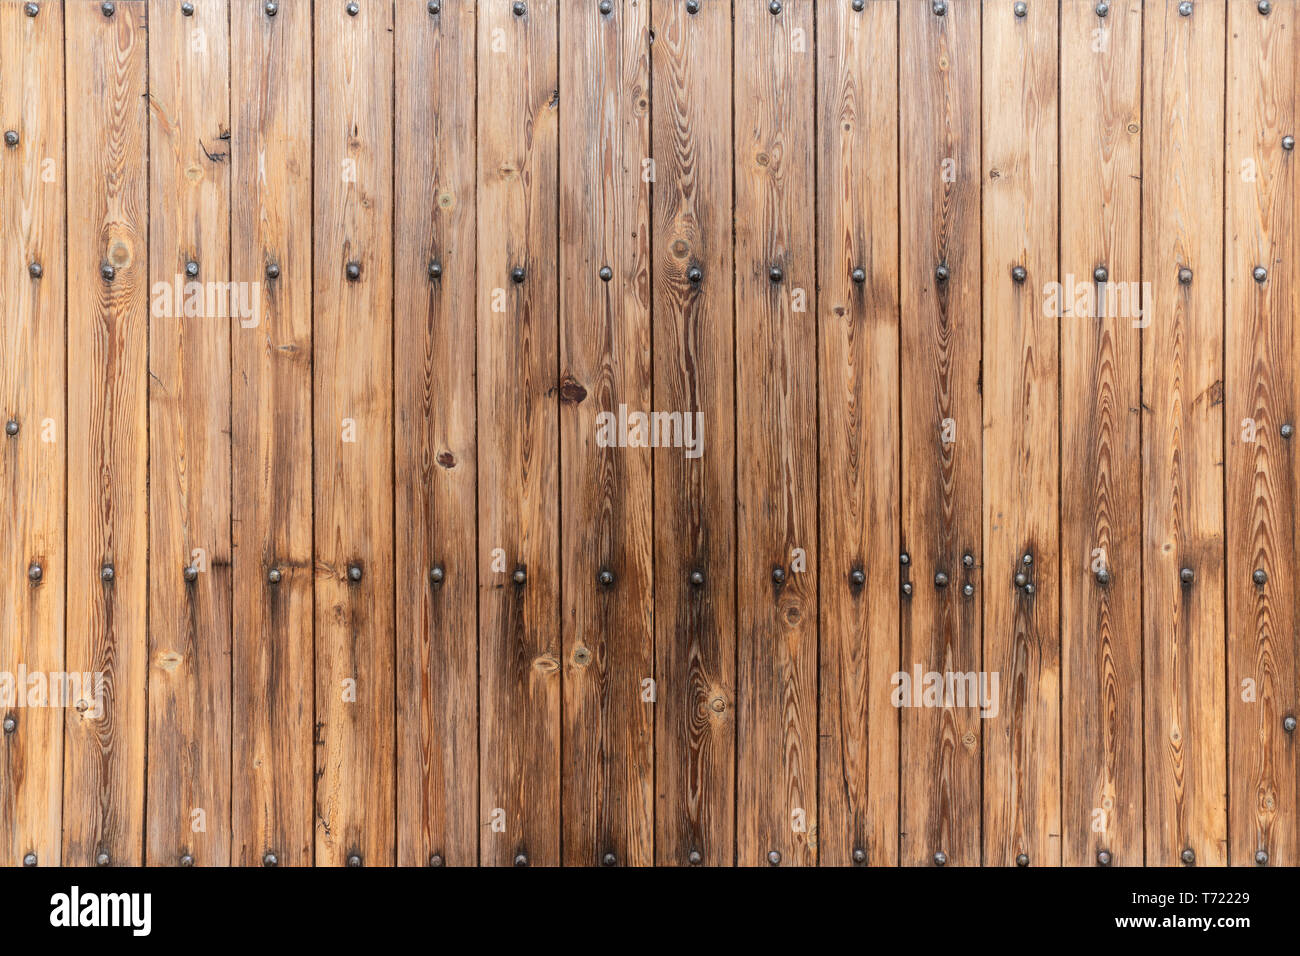 Wood wall covering with big decorative nails Stock Photo